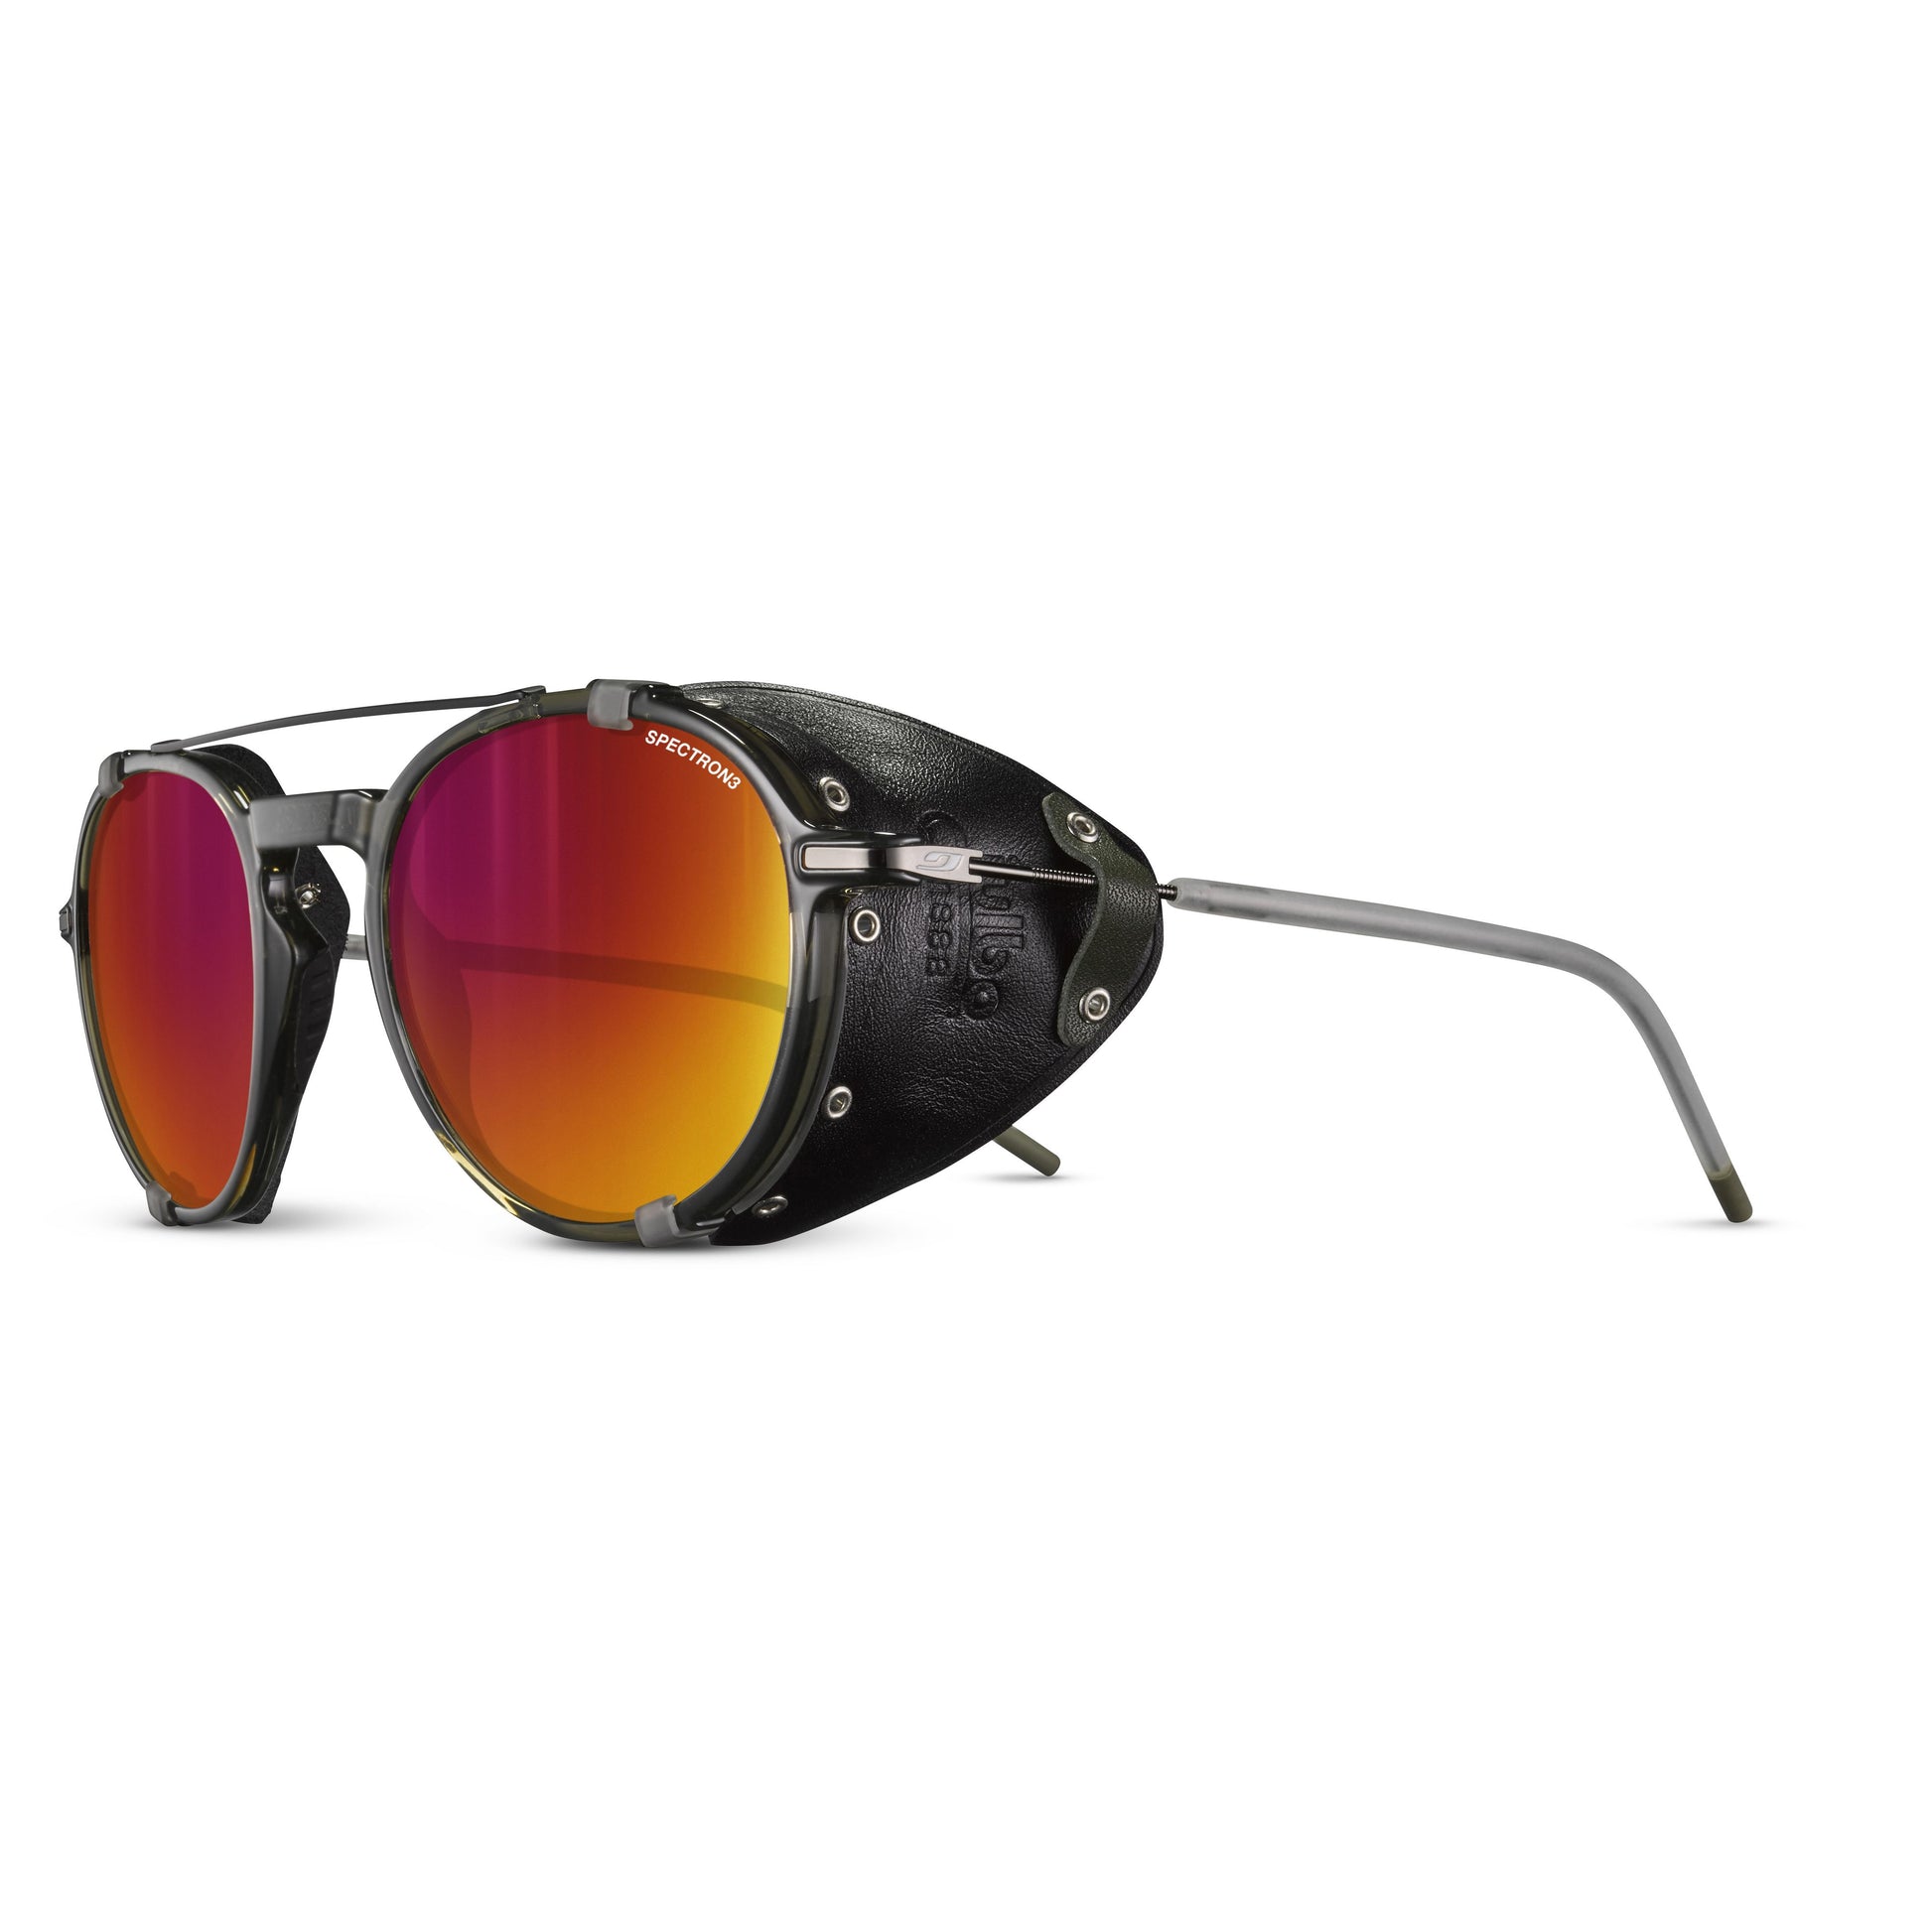 Julbo Legacy Army Green / Black, Multilayer Red Spectron 3 Lens